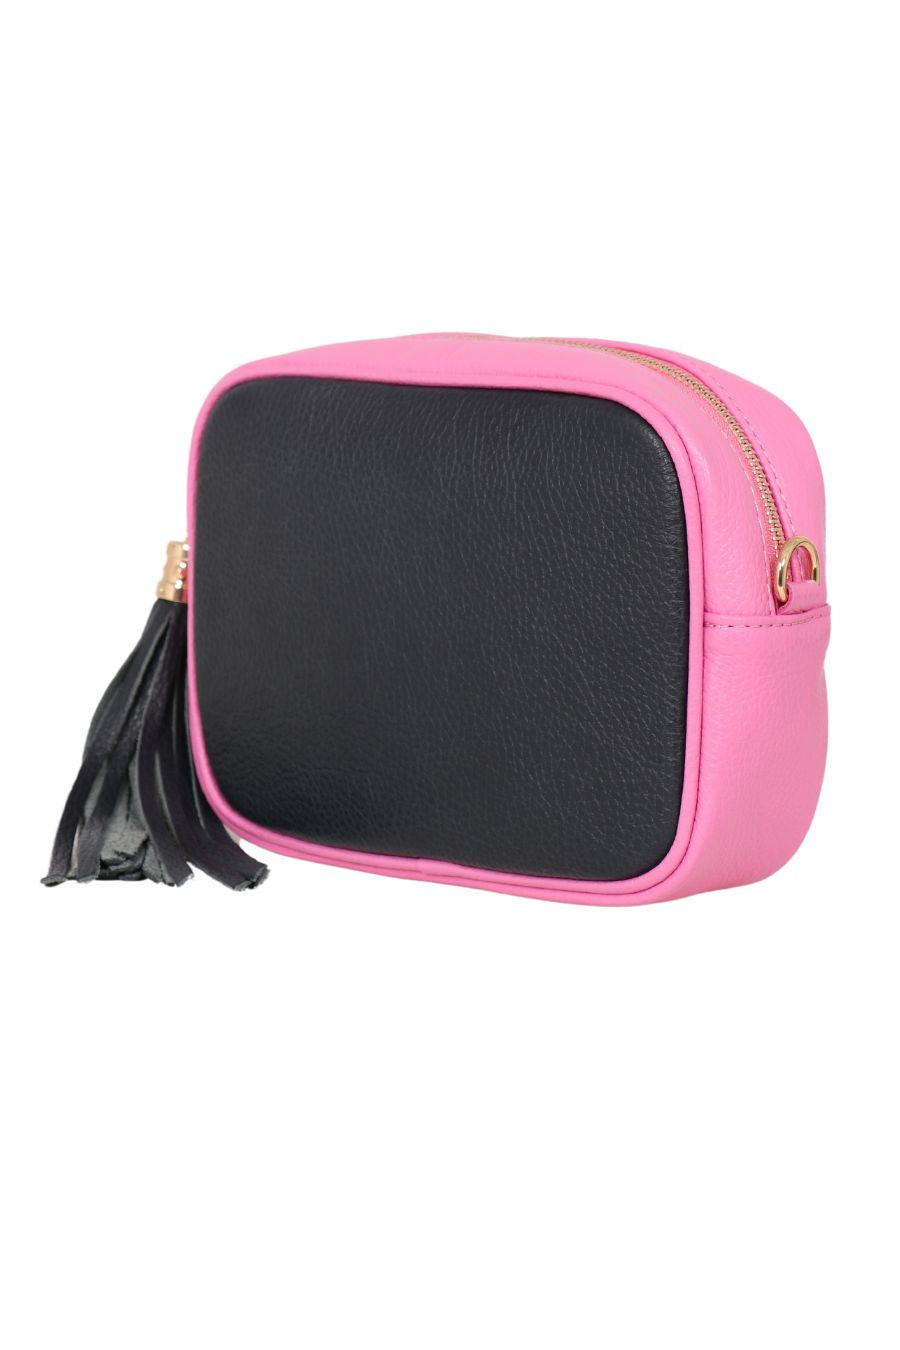 Navy Blue Hot Pink Two Tone Genuine Italian Leather Camera Bag